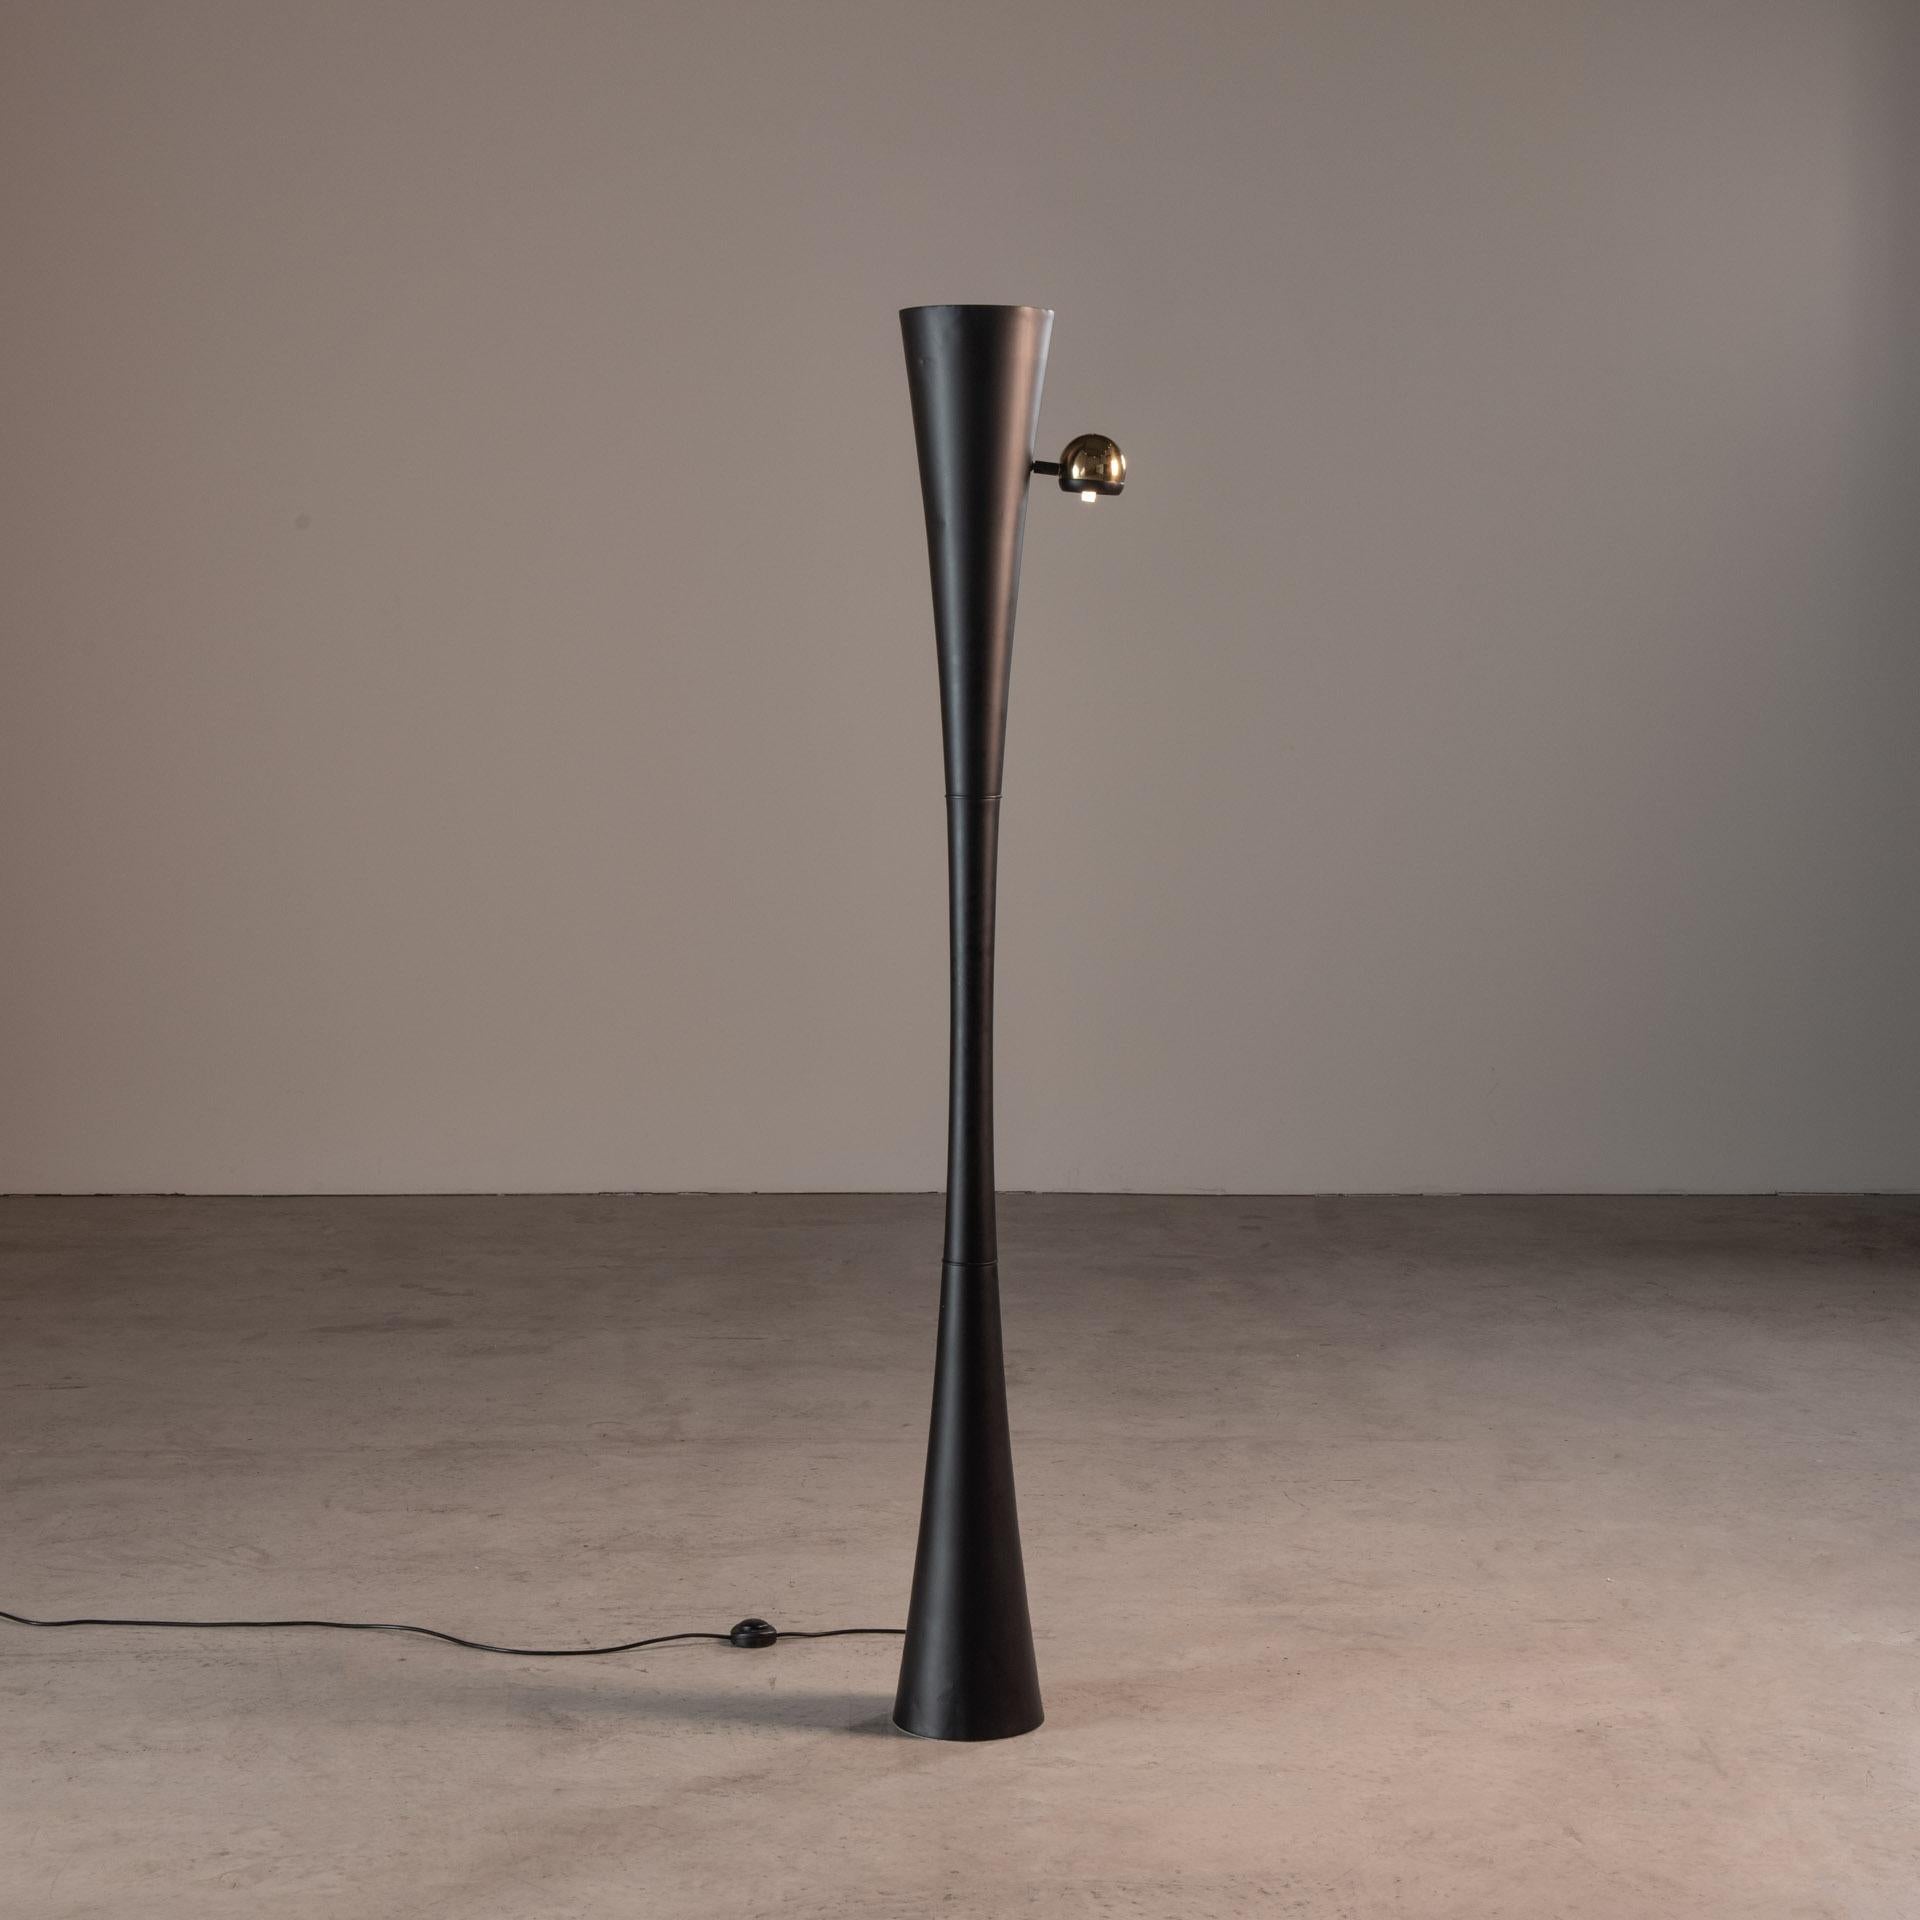 
This exquisite floor lamp, emanating from the celebrated workshops of Dominici, is a testament to the harmonious blend of elegance and industrial robustness that defines high-quality Brazilian lighting design. Crafted by the renowned Enrico Furio,